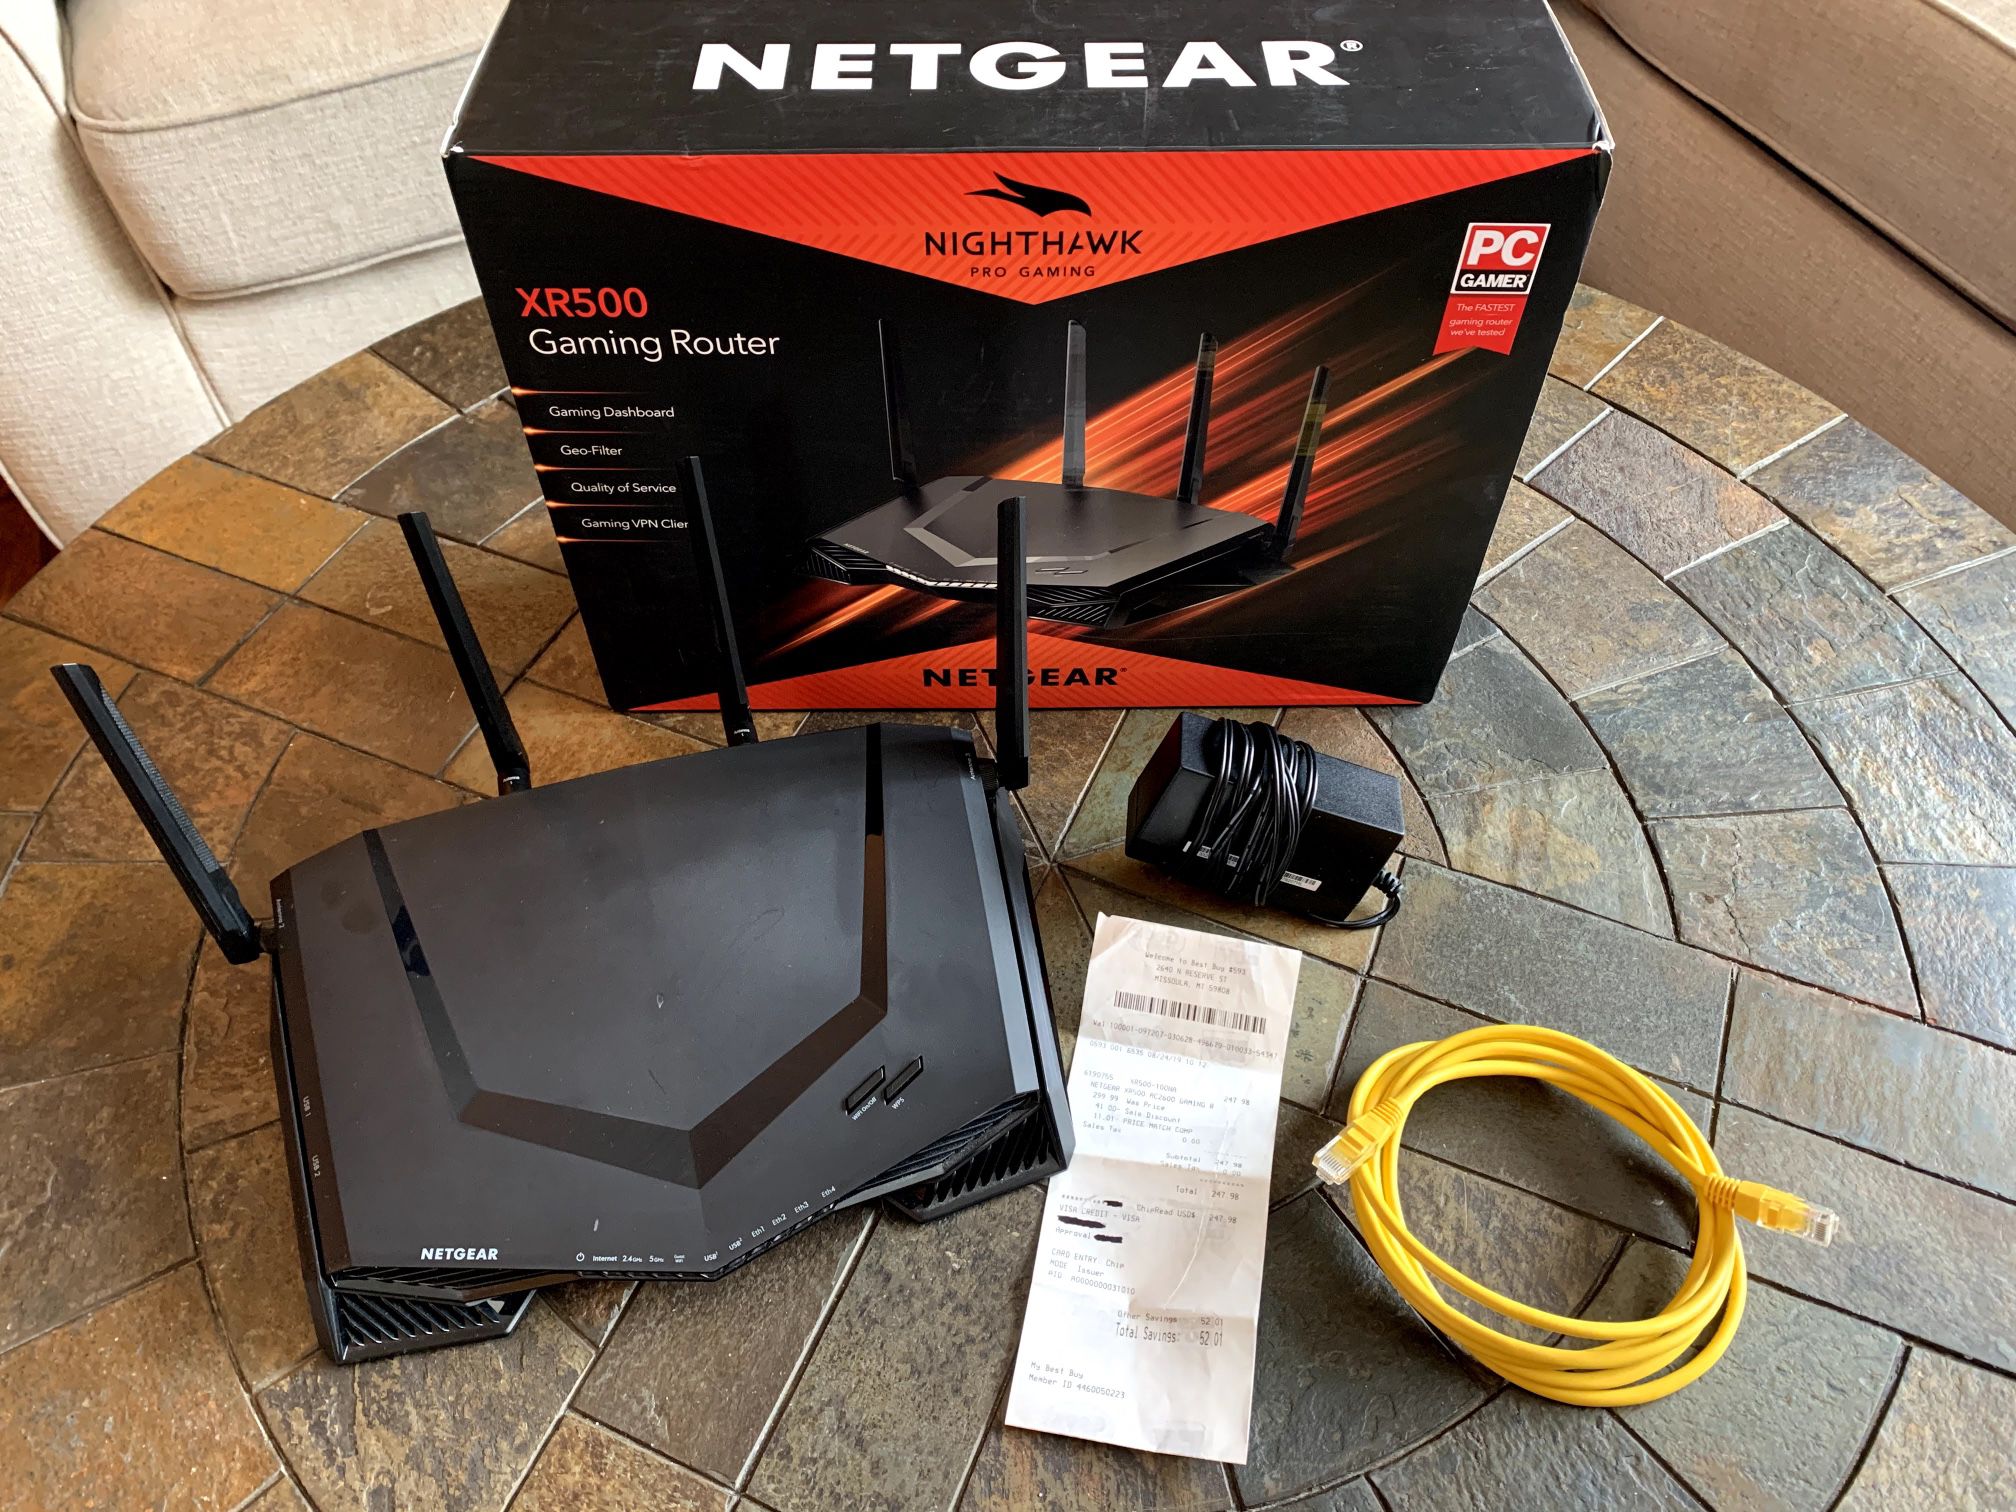 NETGEAR Nighthawk Pro Gaming XR500 WiFi Router with 4 Ethernet ports speeds up to 2.6 Gigabits